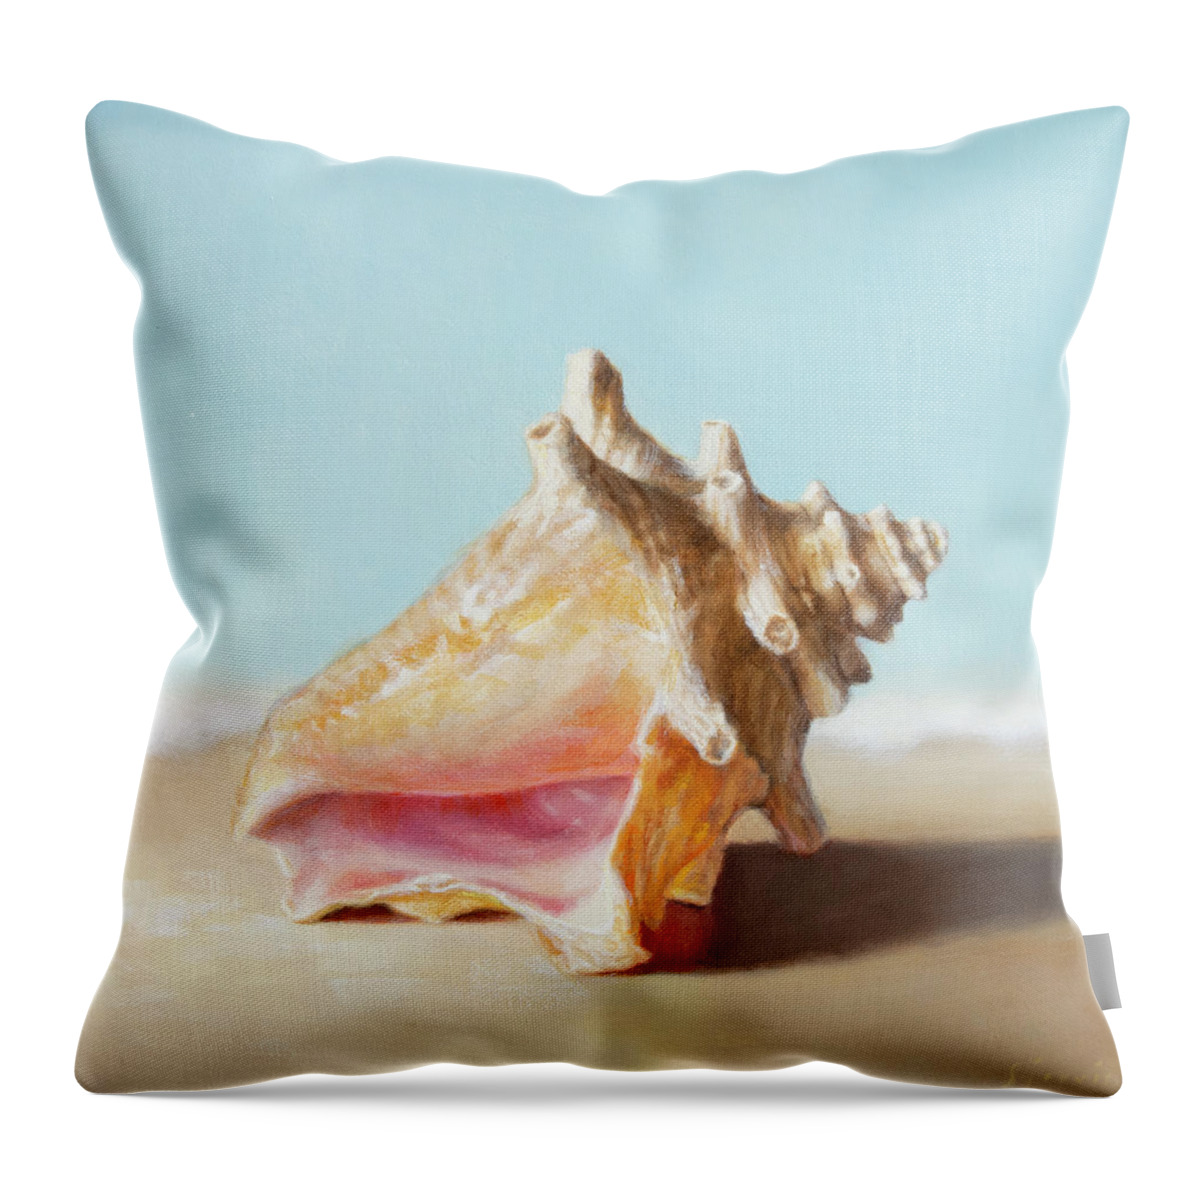 Shell Throw Pillow featuring the painting Conch by Susan N Jarvis